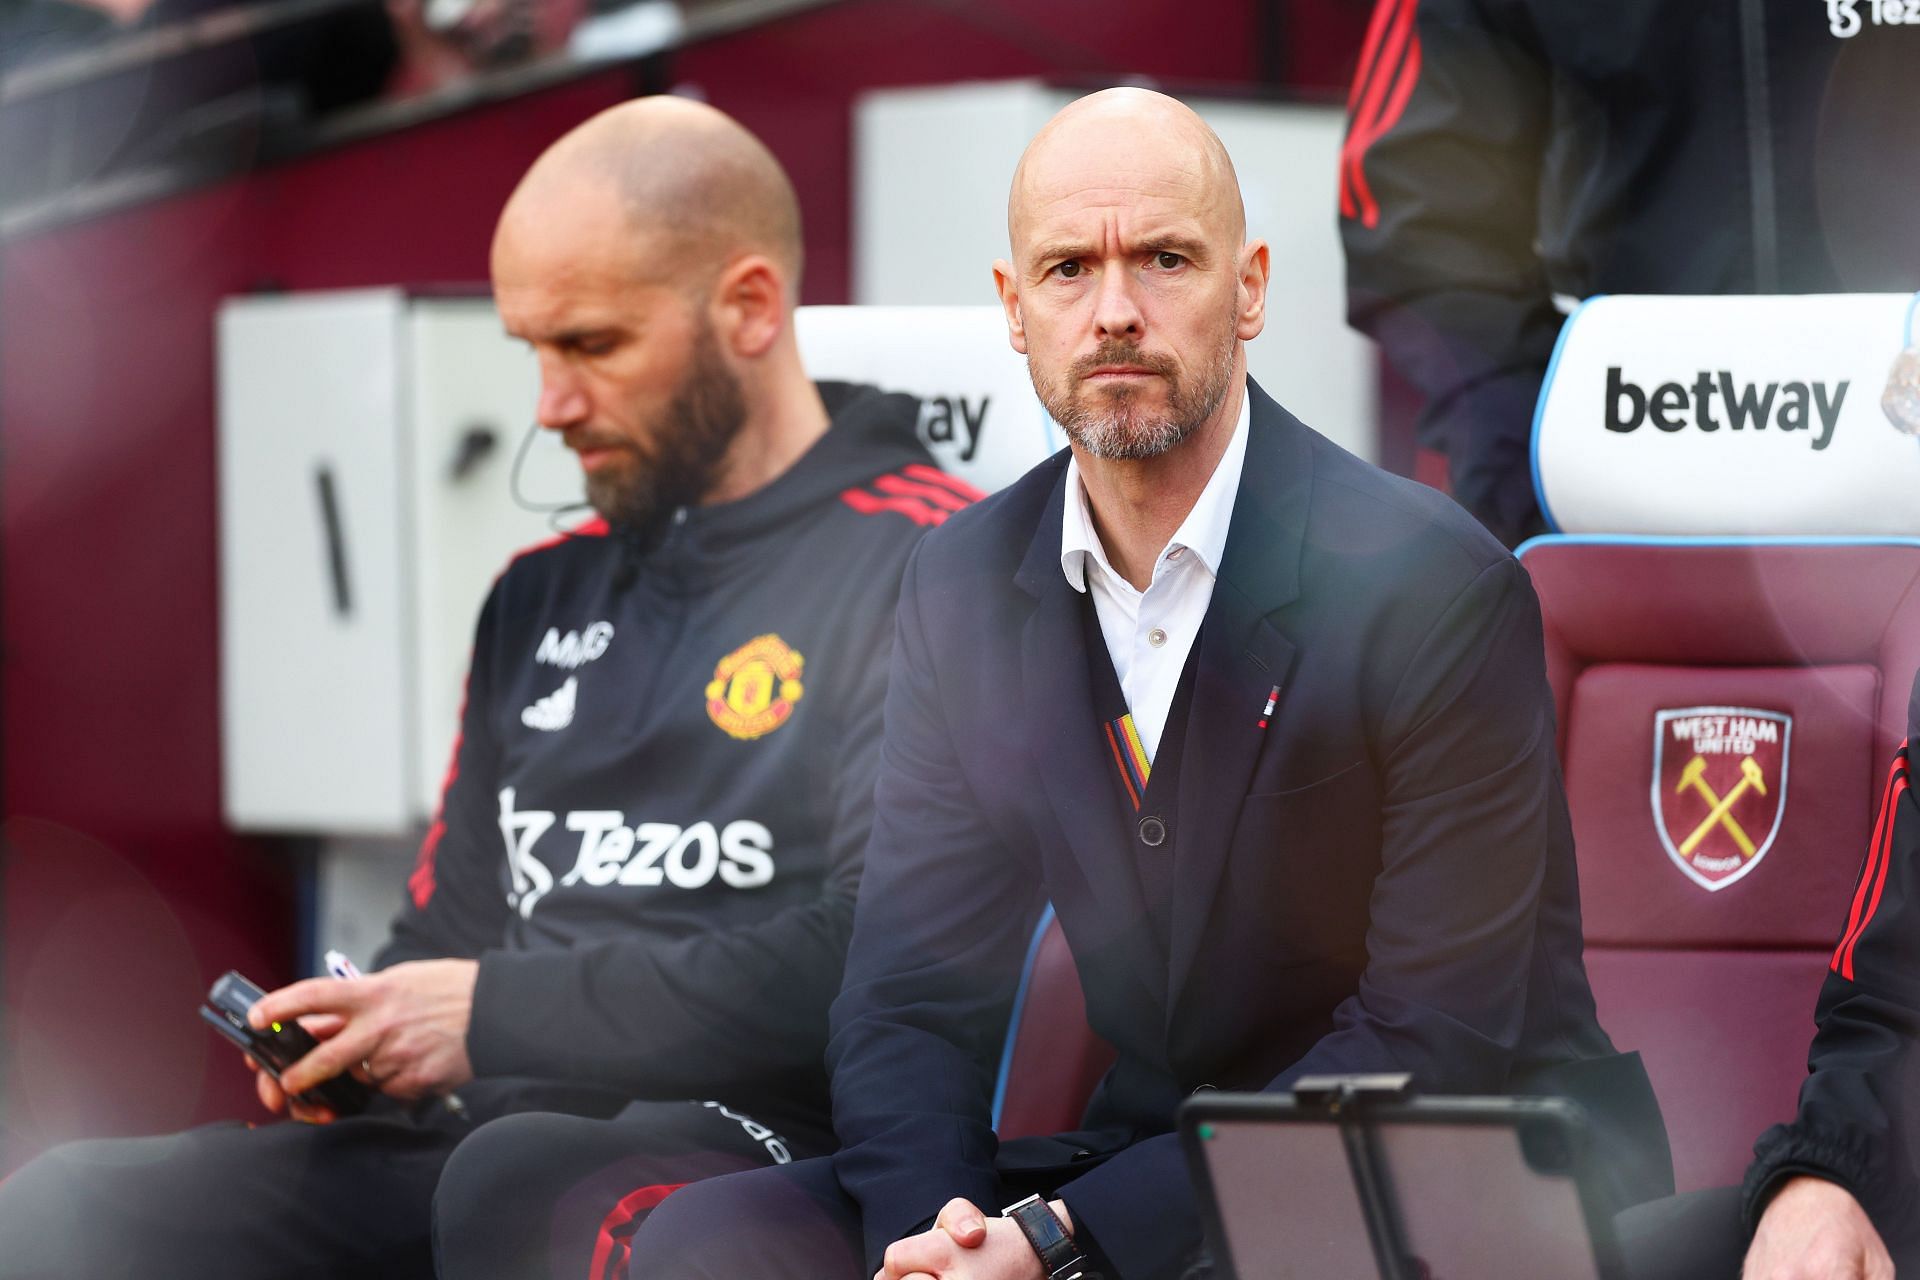 “It’s not about Liverpool, it's about us” - Manchester United boss Erik ten Hag delivers verdict on top 4 race after 1-0 West Ham loss